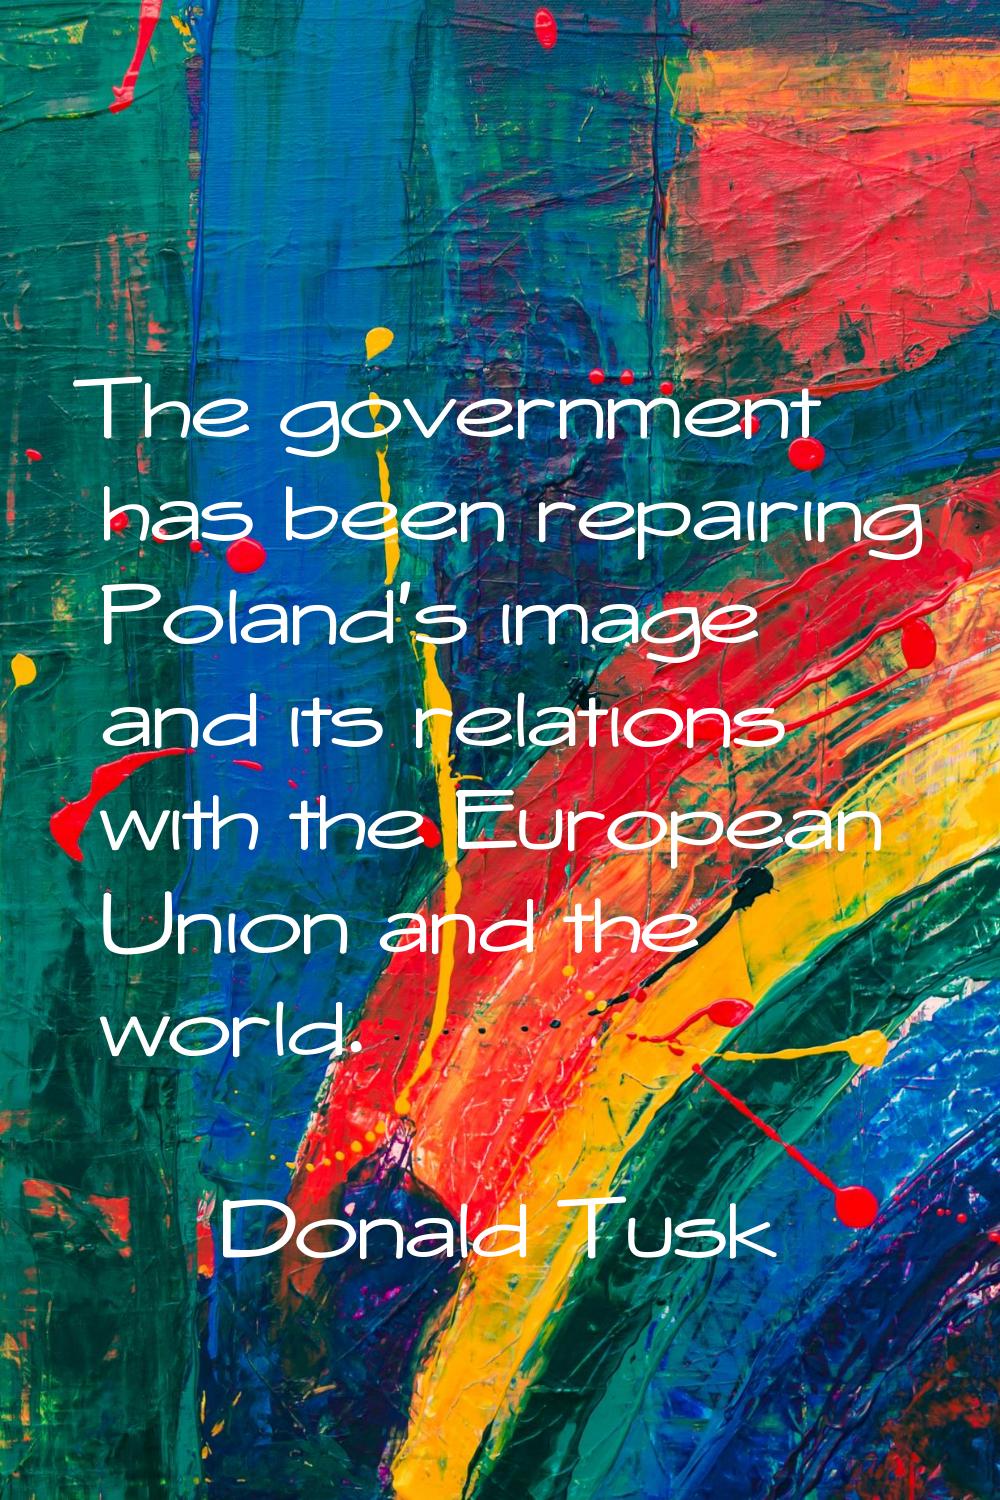 The government has been repairing Poland's image and its relations with the European Union and the 